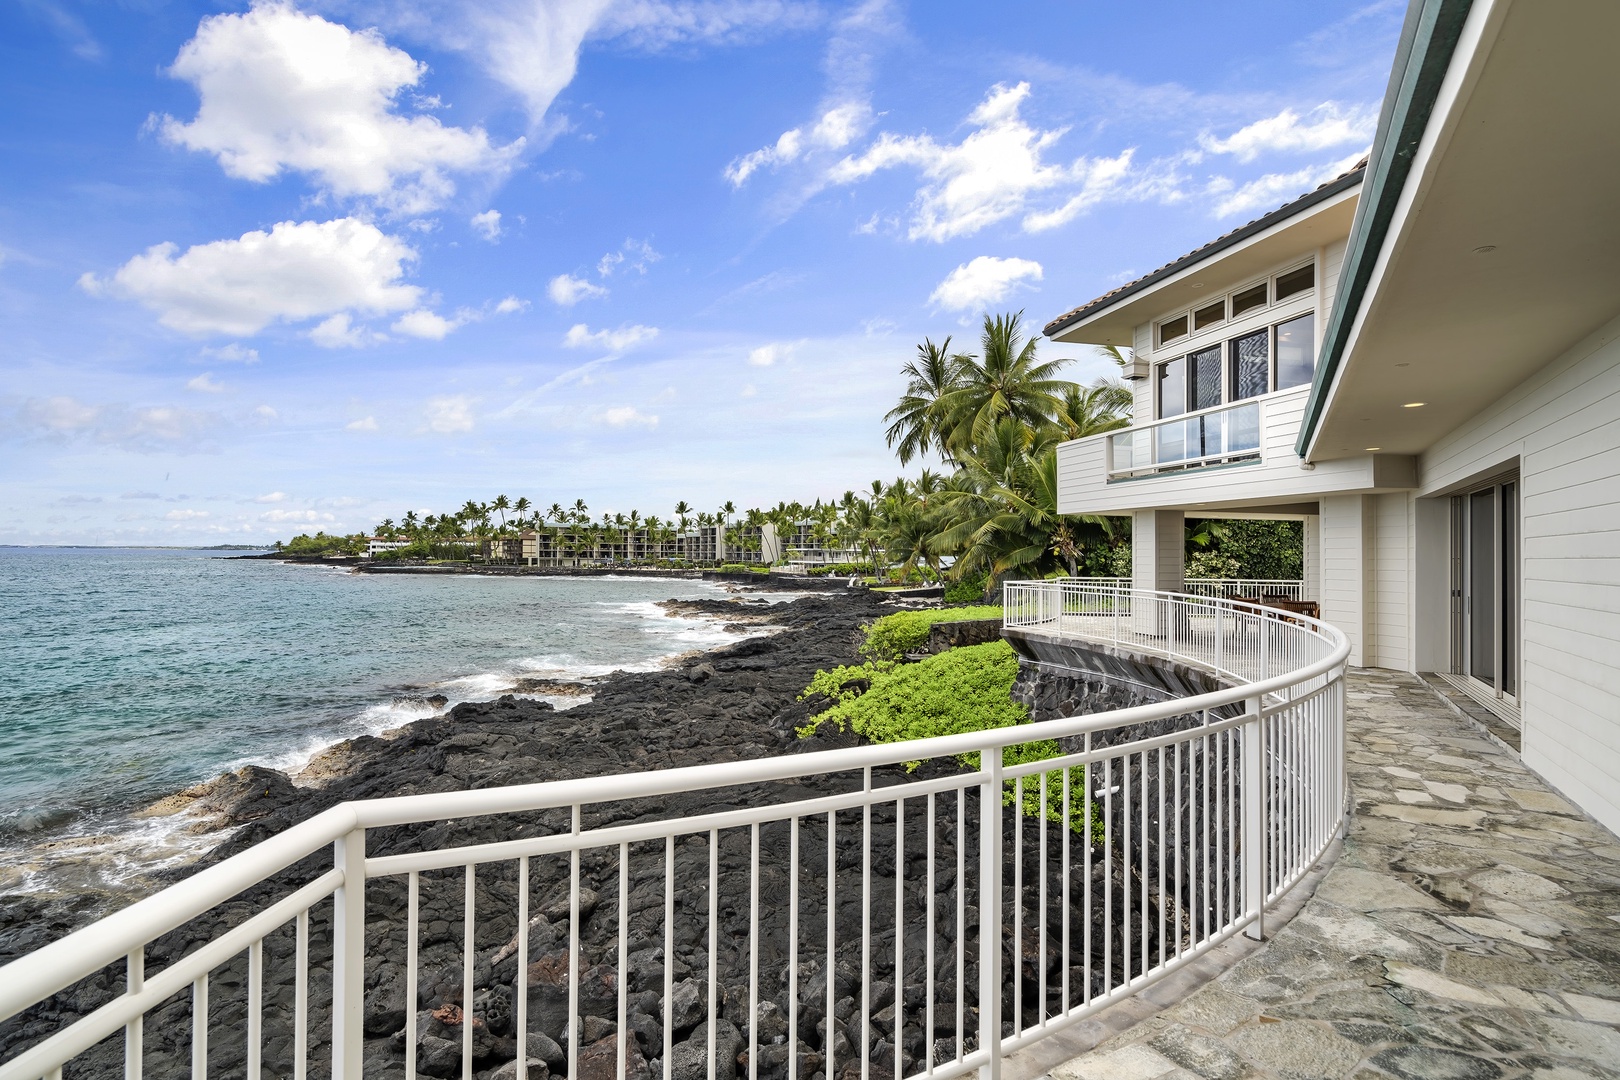 Kailua Kona Vacation Rentals, Ali'i Point #12 - Large ocean frontage allows for multiple vantage points to take in the ocean activity!